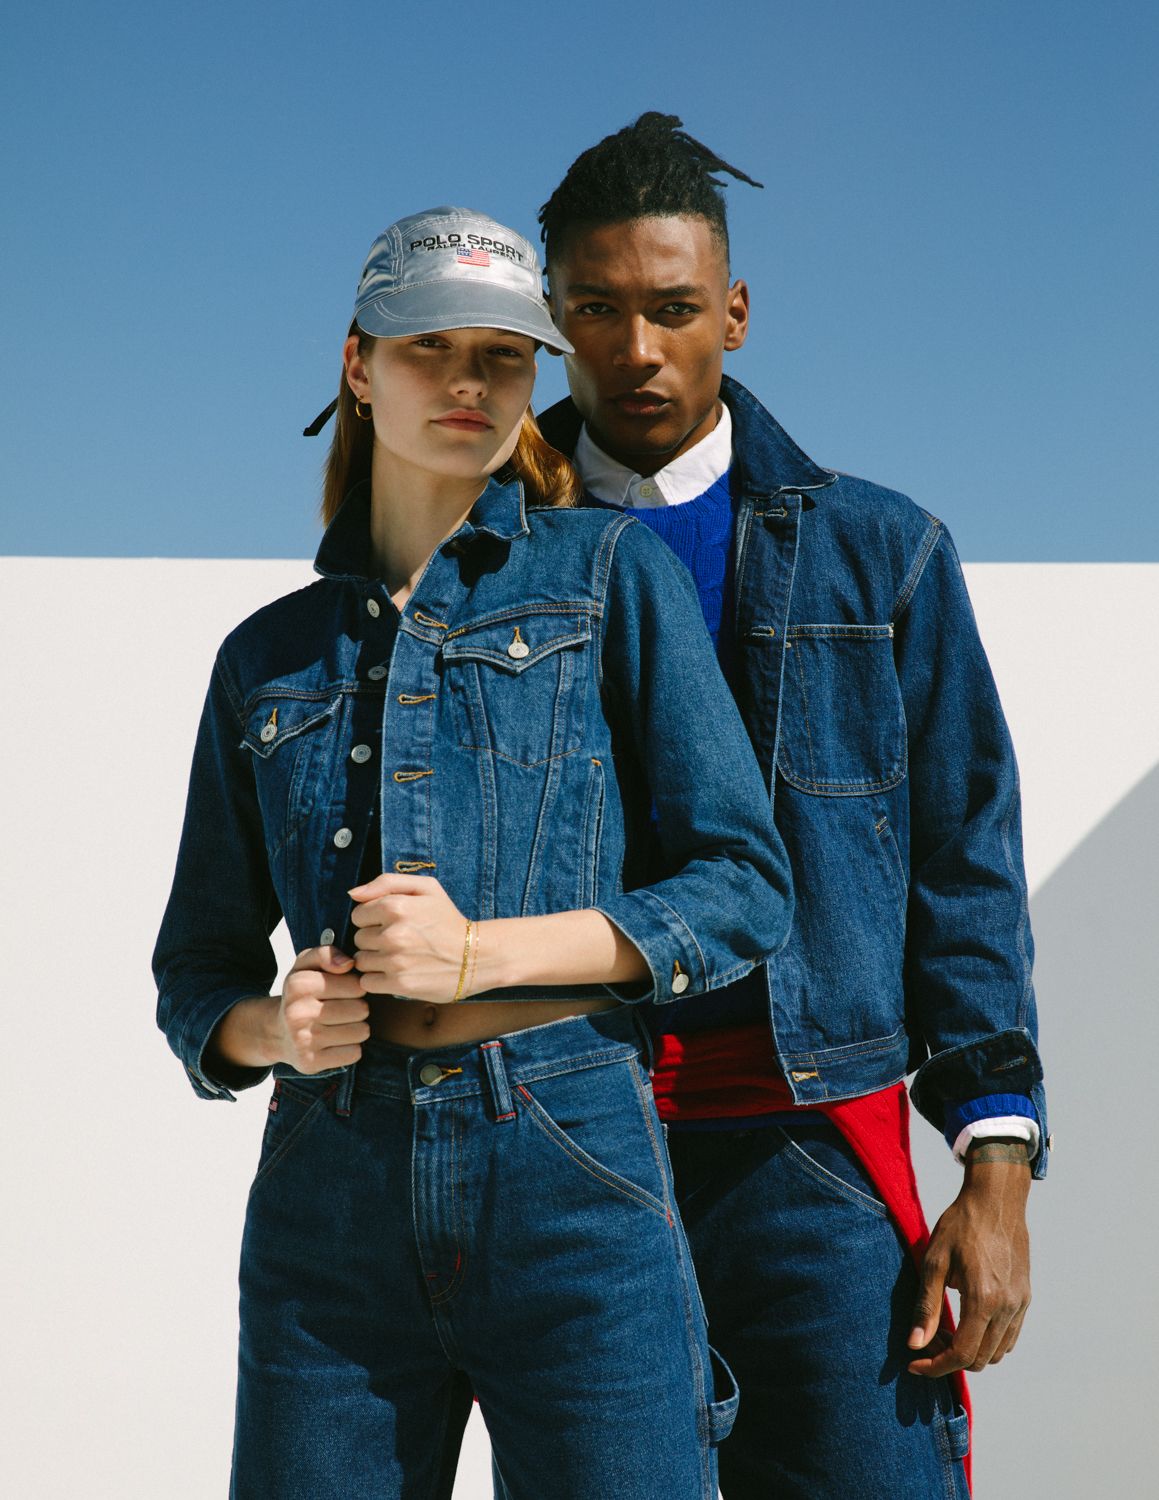 Ralph Lauren Is Bringing Back the Polo Sport Collection - Polo Sport Denim  and Silver Launch Date